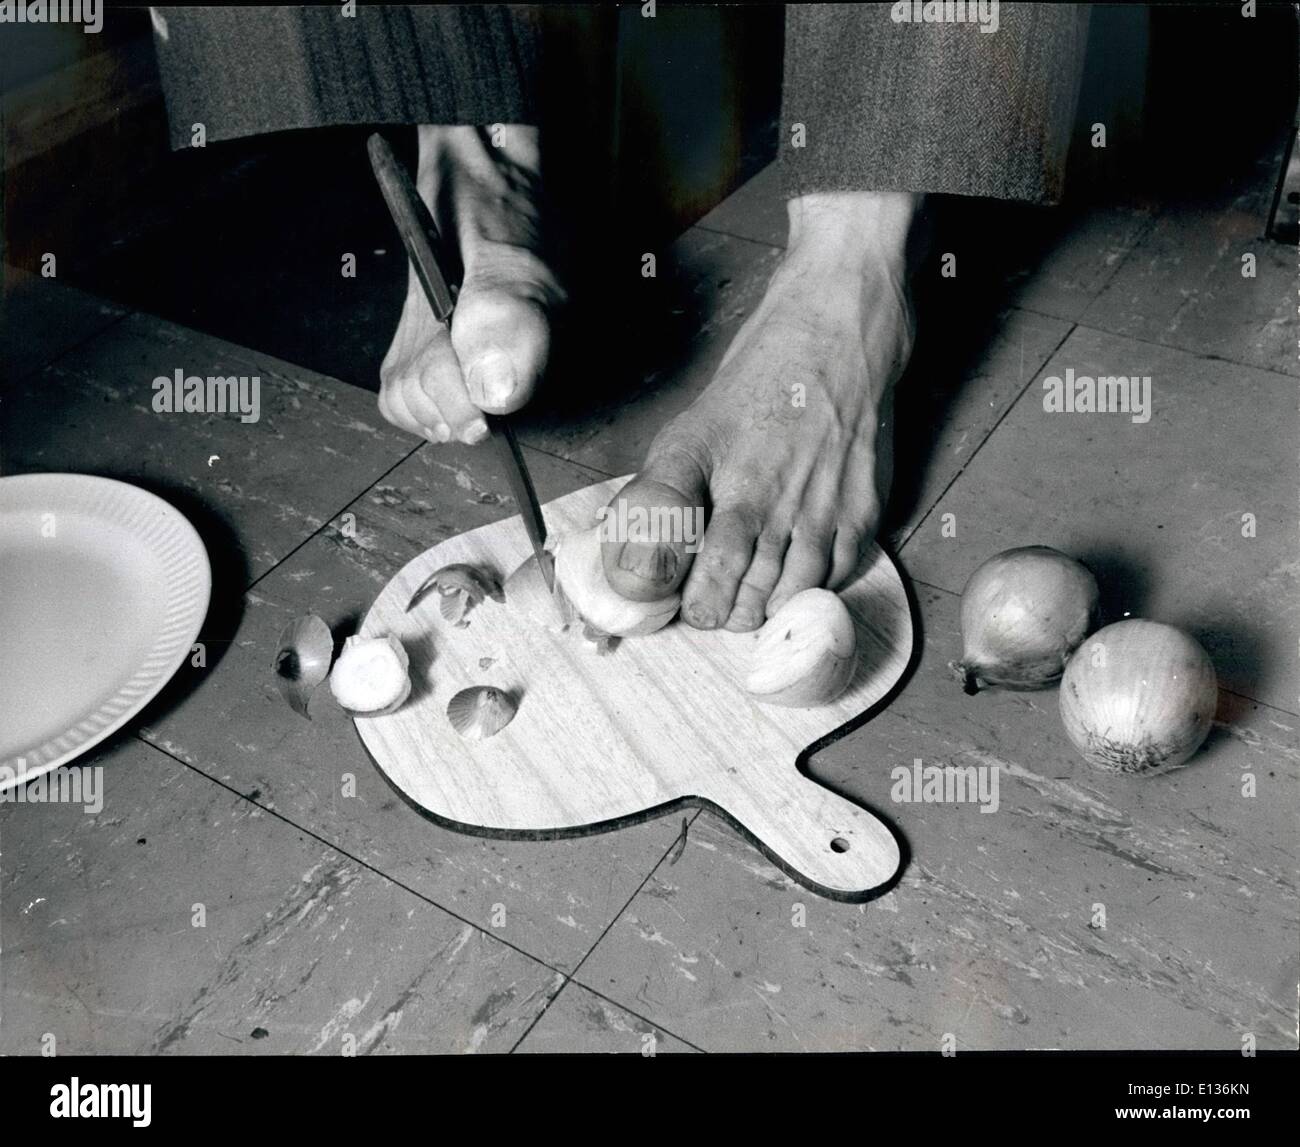 Feb. 28, 2012 - Frank Latch Prepares Onions for his evening meal. Stock Photo